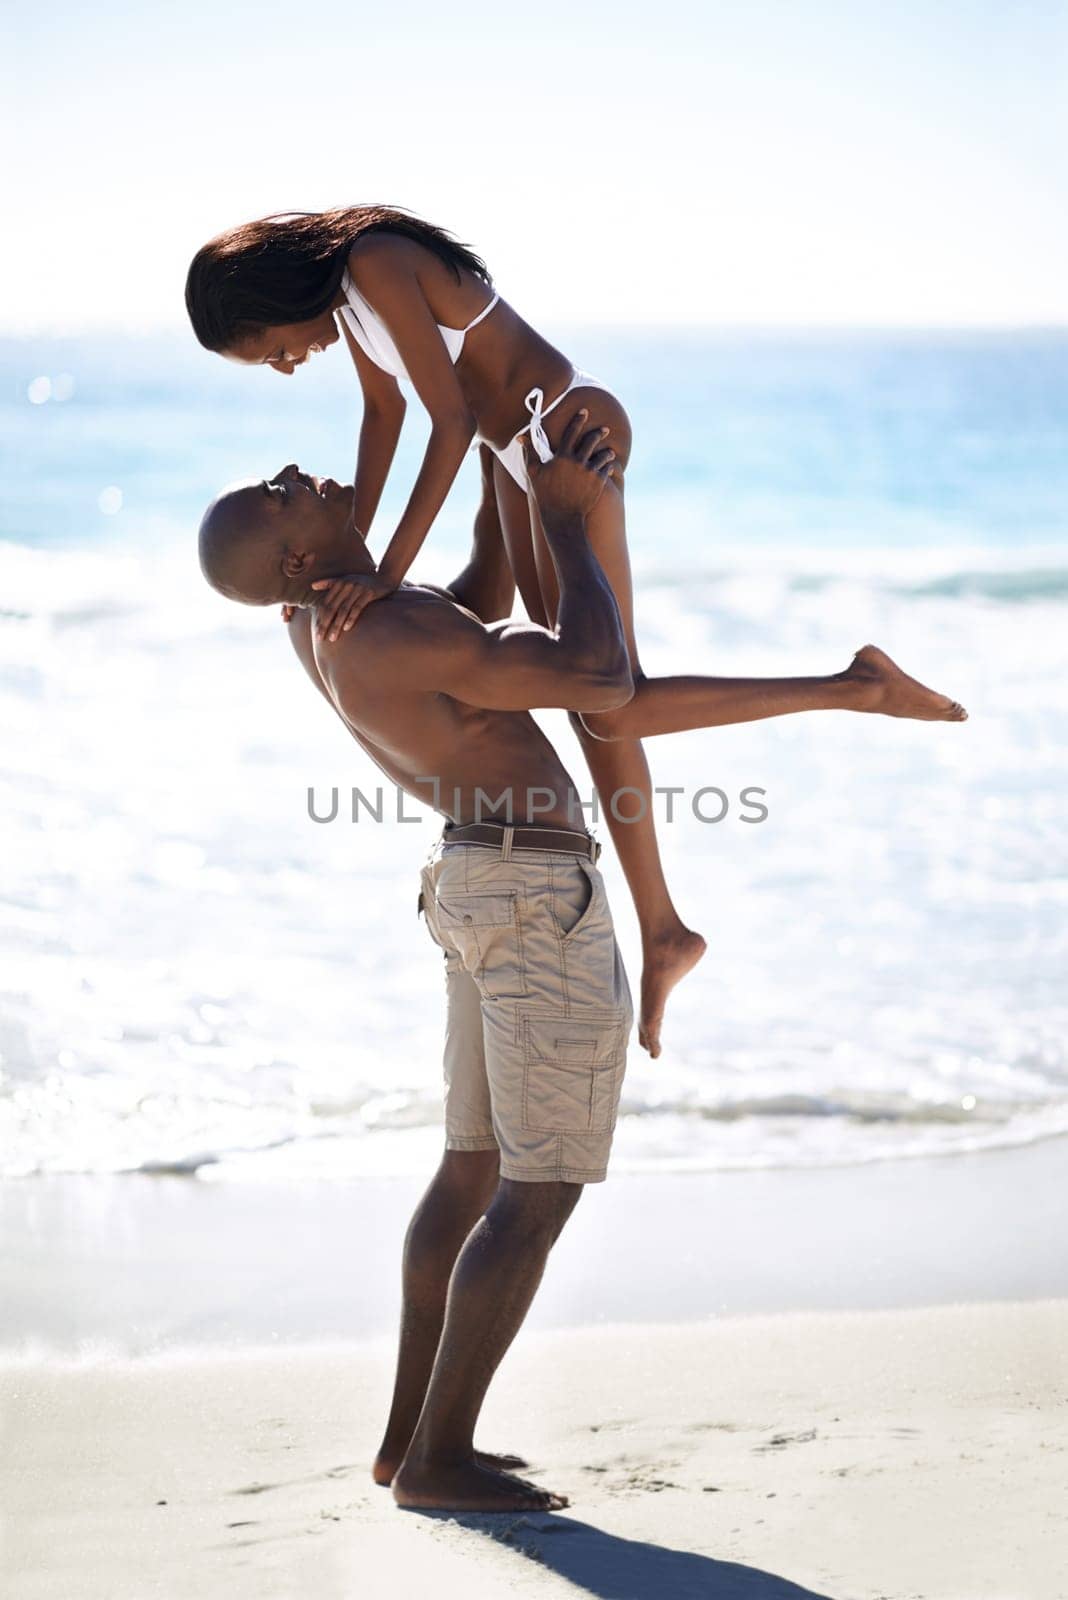 Lifting, hug and couple at a beach with love, romance and bonding in nature together. Support, travel and black people embrace at sea with freedom, energy and excited for summer, vacation or trip.